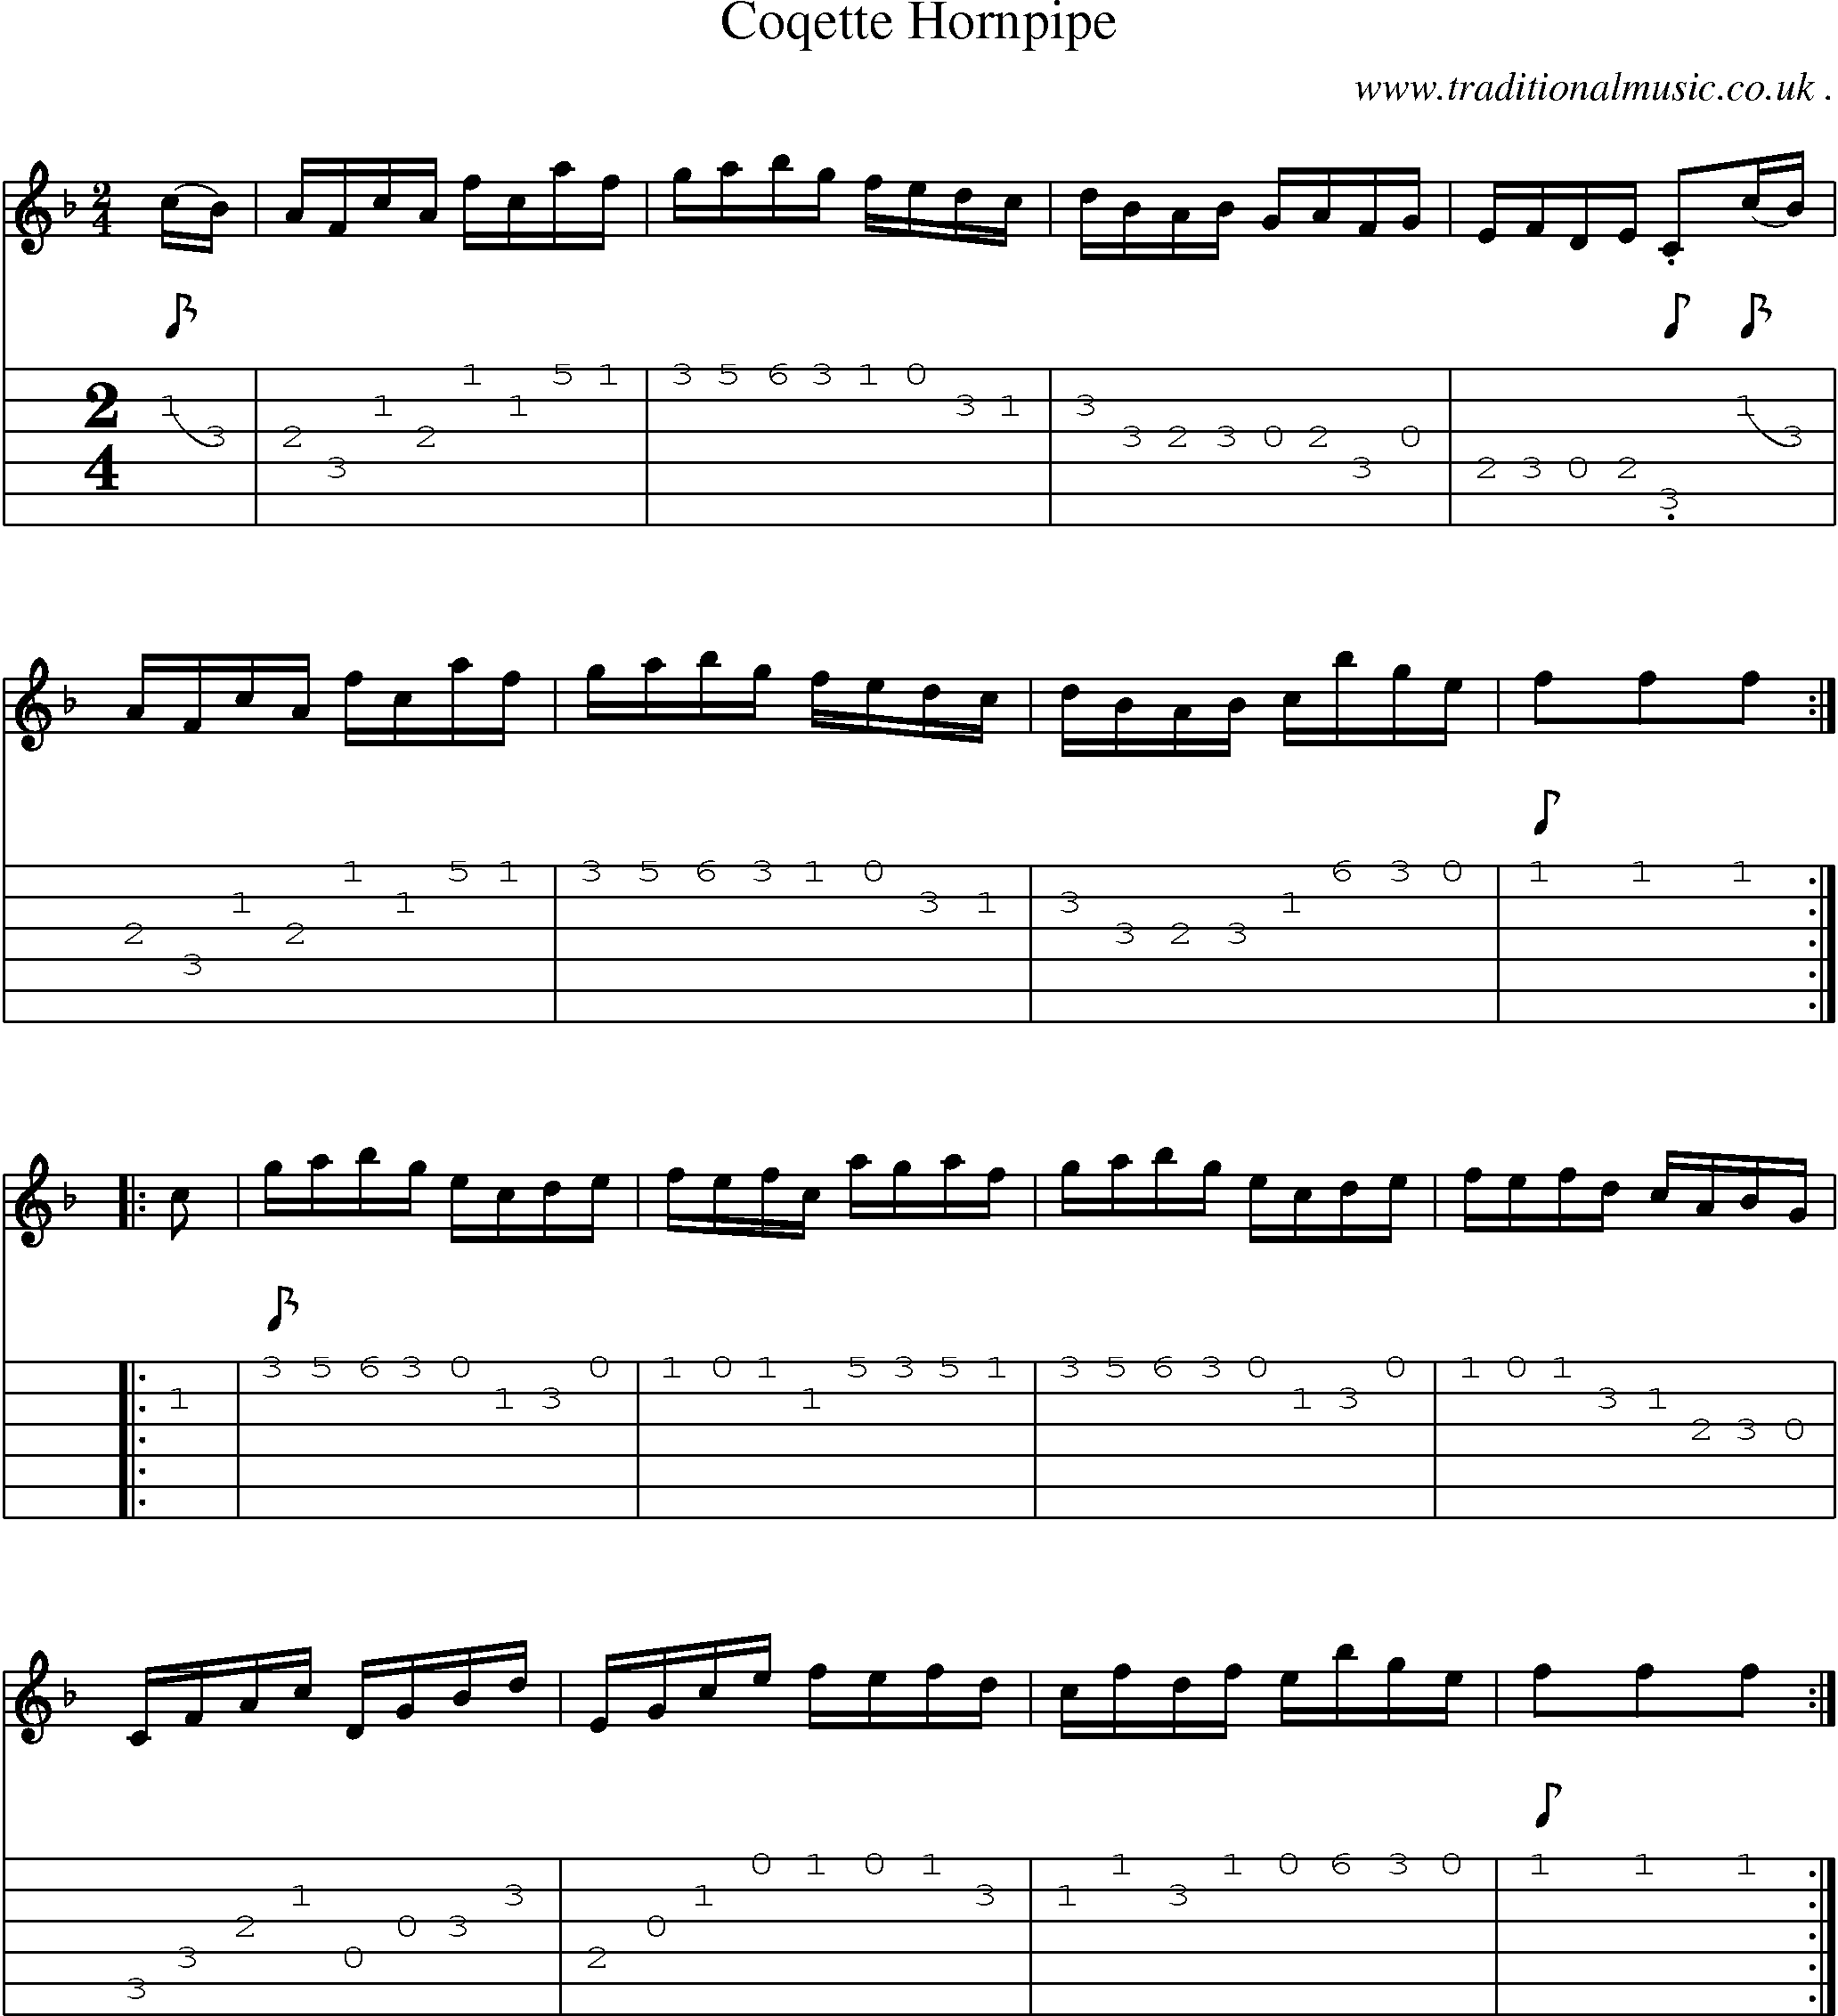 Sheet-Music and Guitar Tabs for Coqette Hornpipe